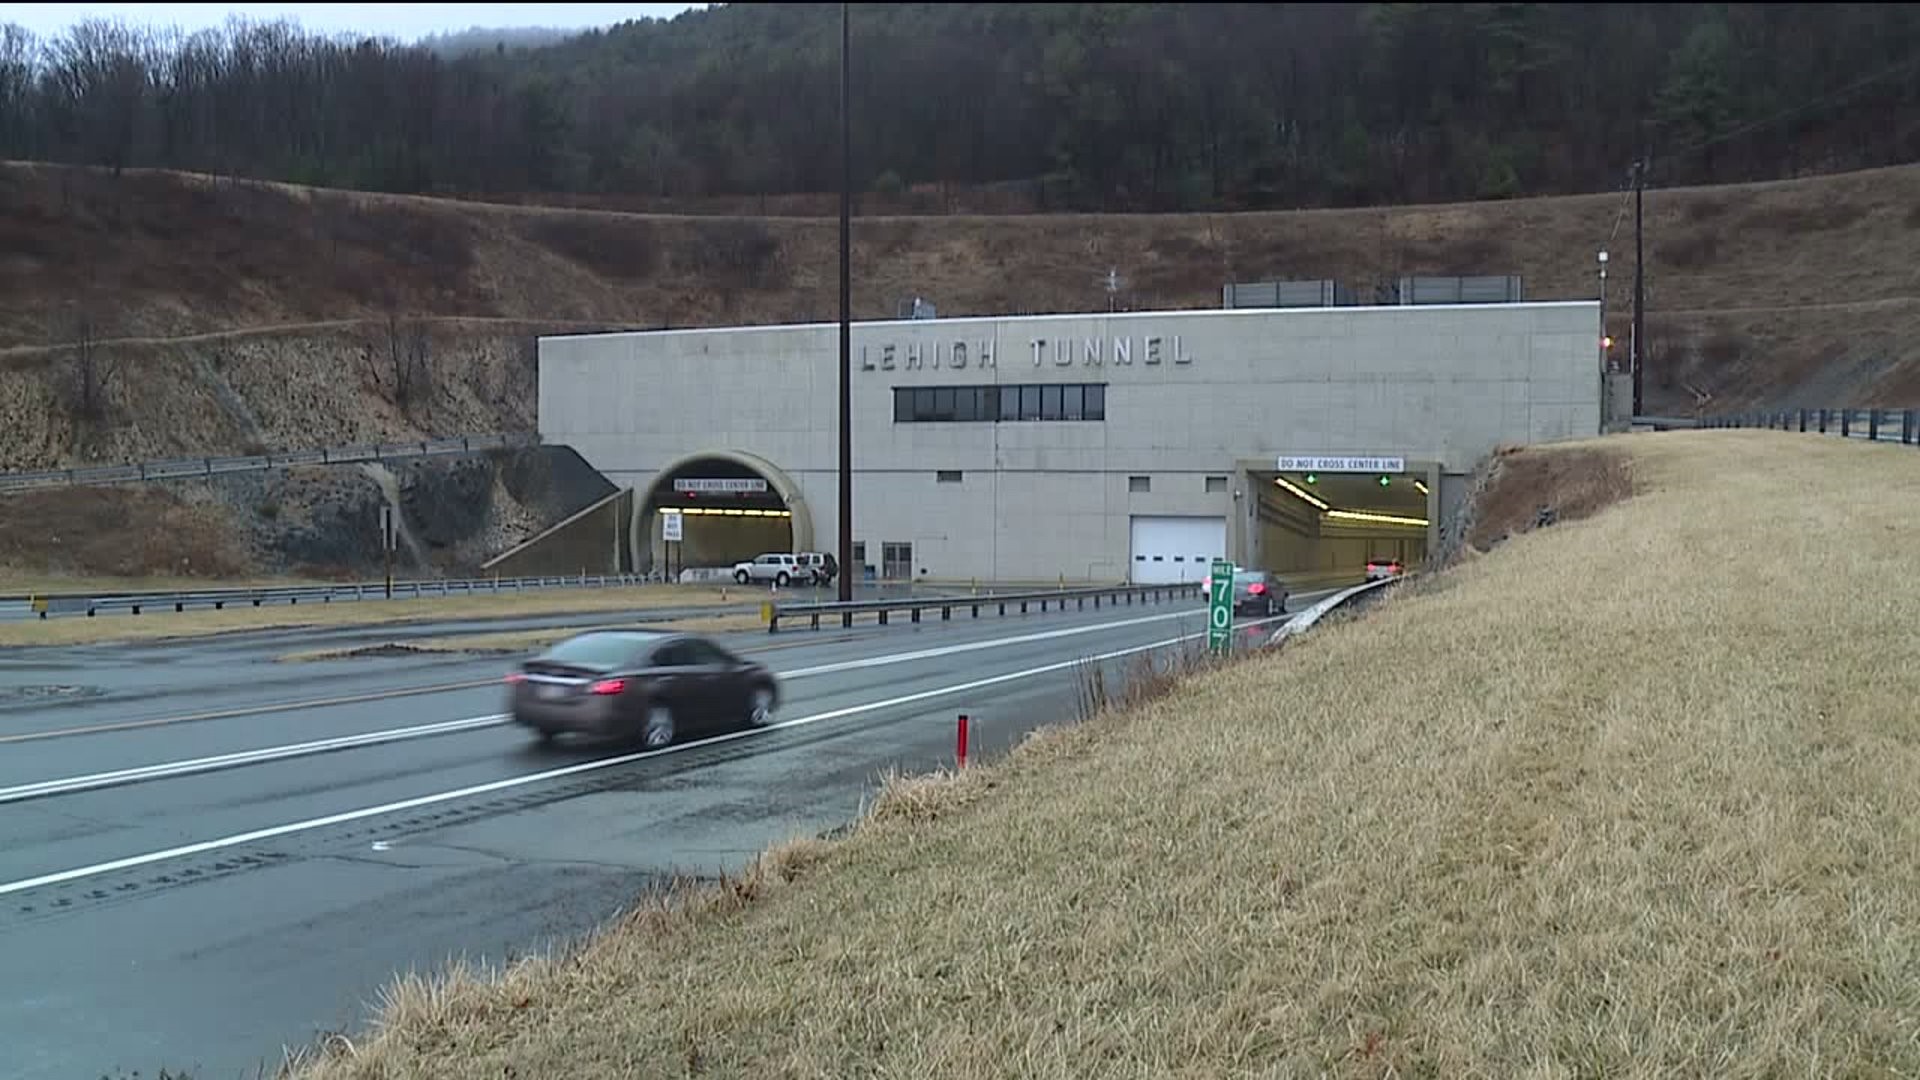 Traffic Delays Expected at Lehigh Tunnel on Turnpike